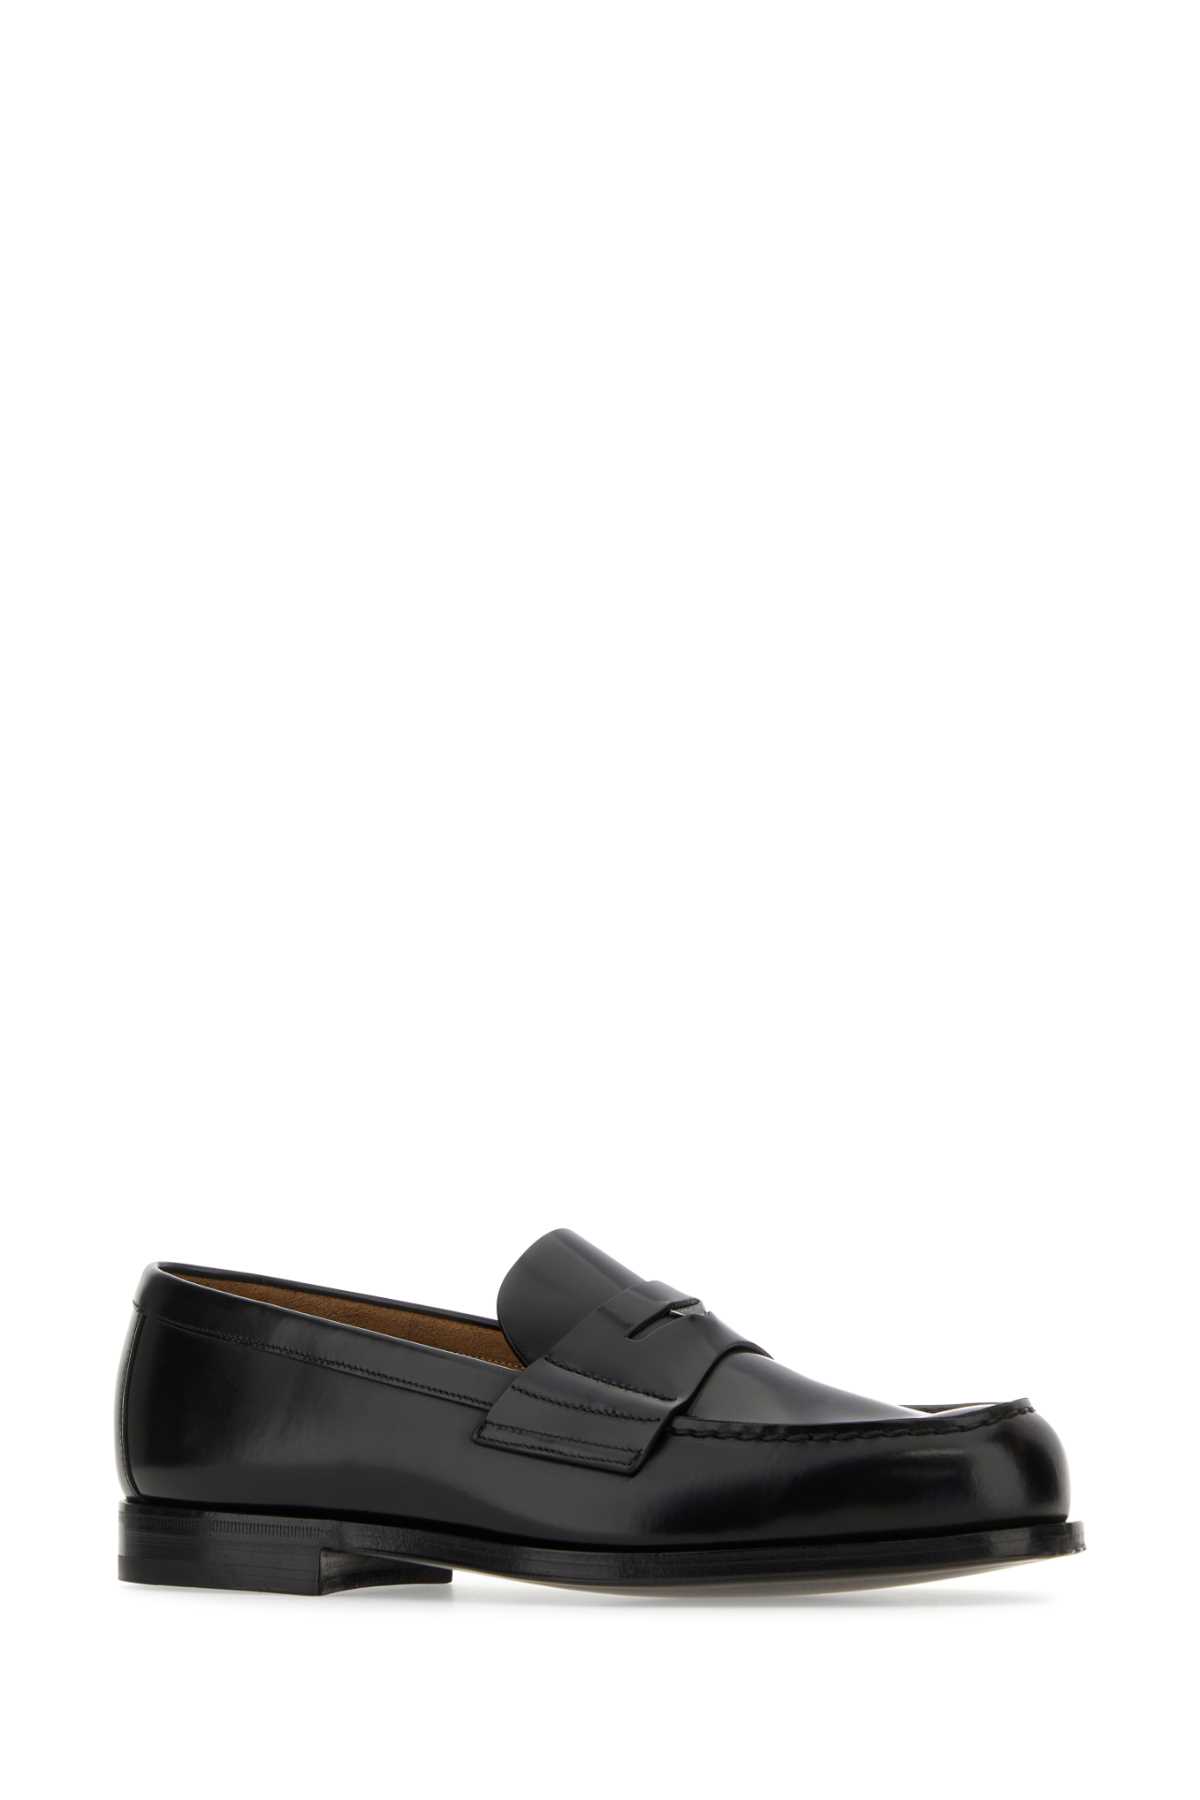 Shop Prada Black Leather Loafers In F0002